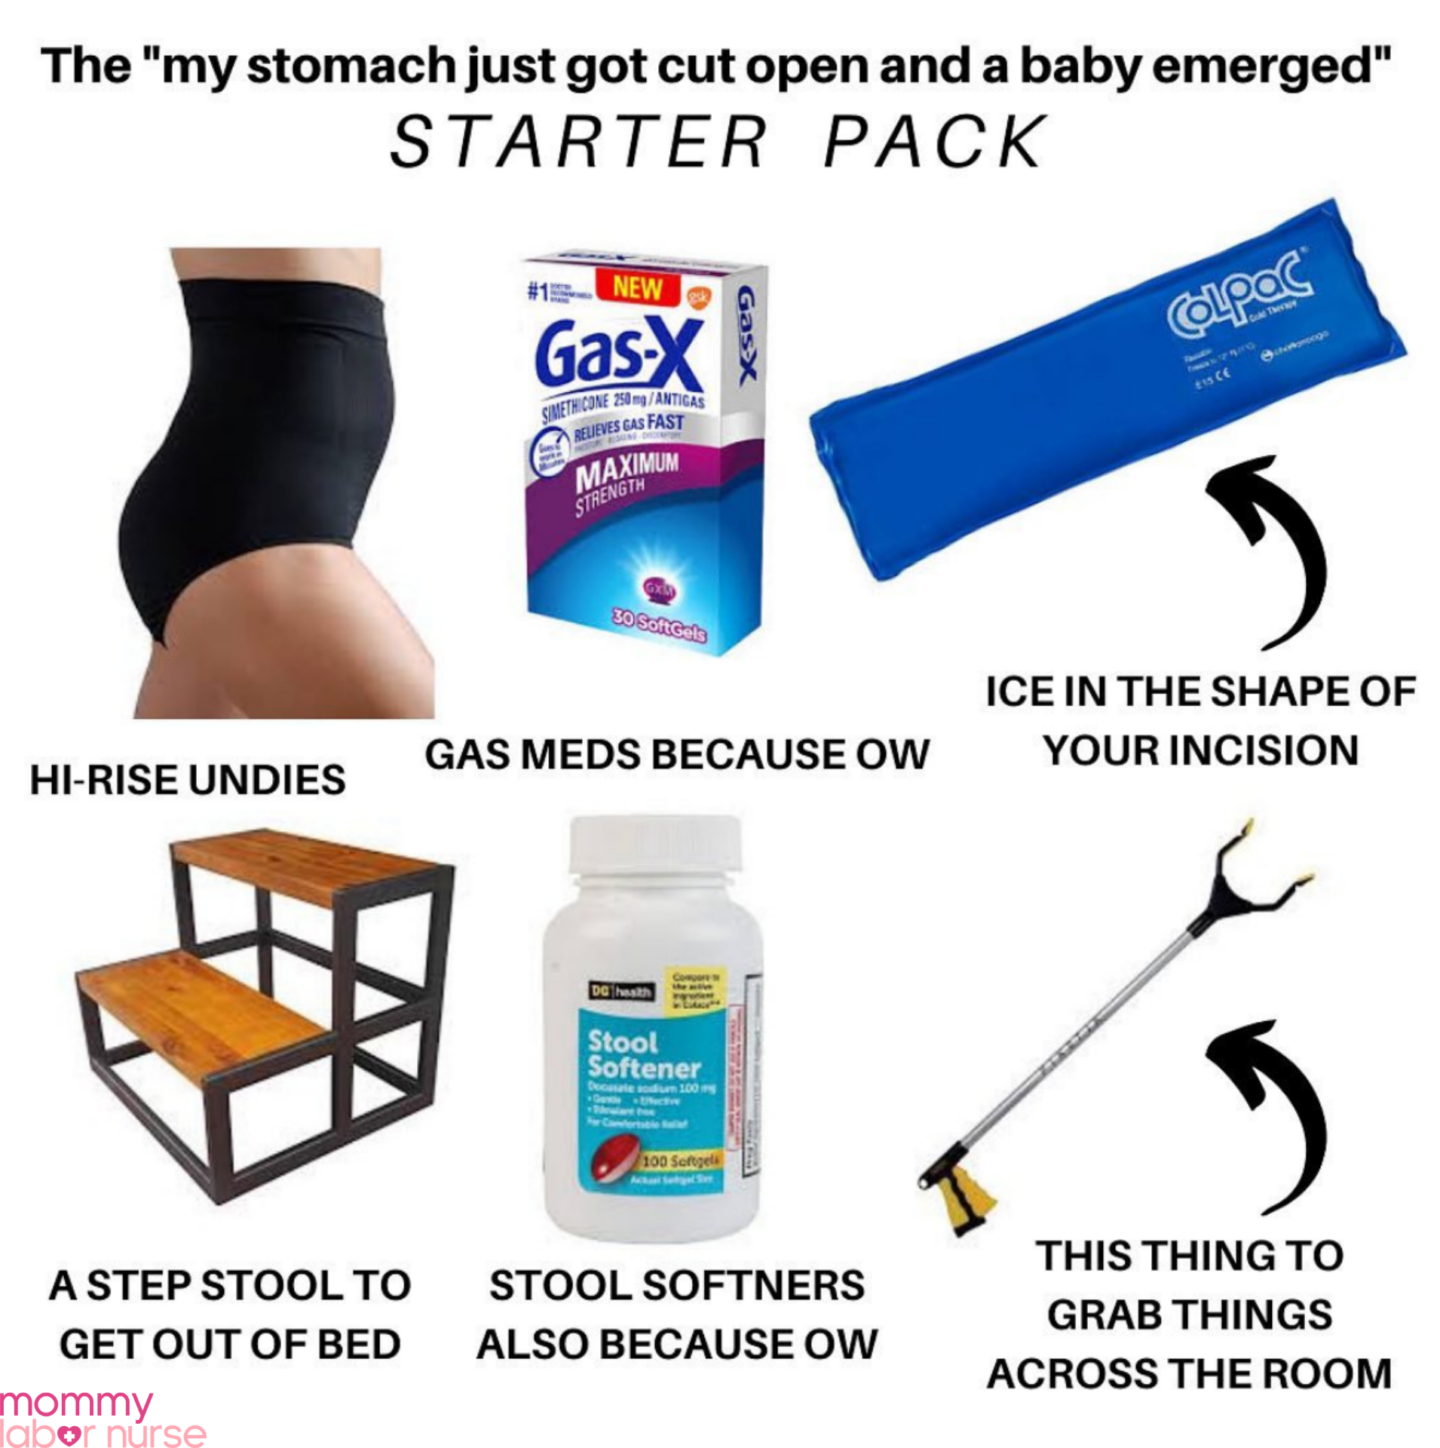 https://mommylabornurse.com/wp-content/uploads/2020/10/c-section-recovery-starter-pack-1440x1448.png